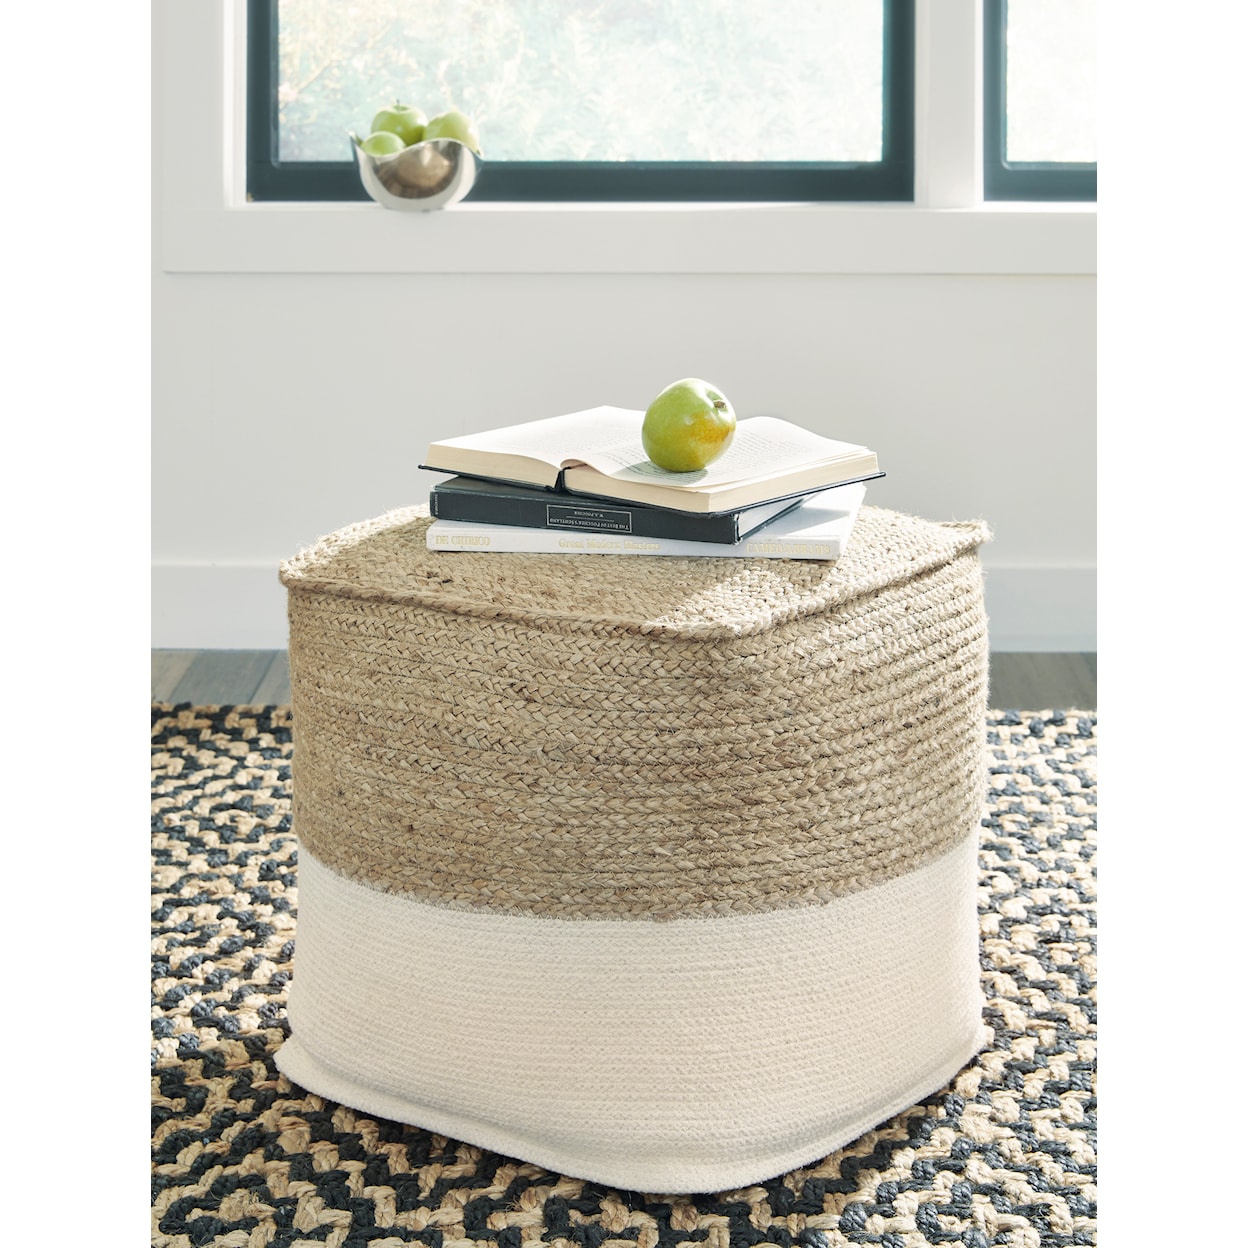 Signature Design by Ashley Poufs Sweed Valley Natural/White Pouf